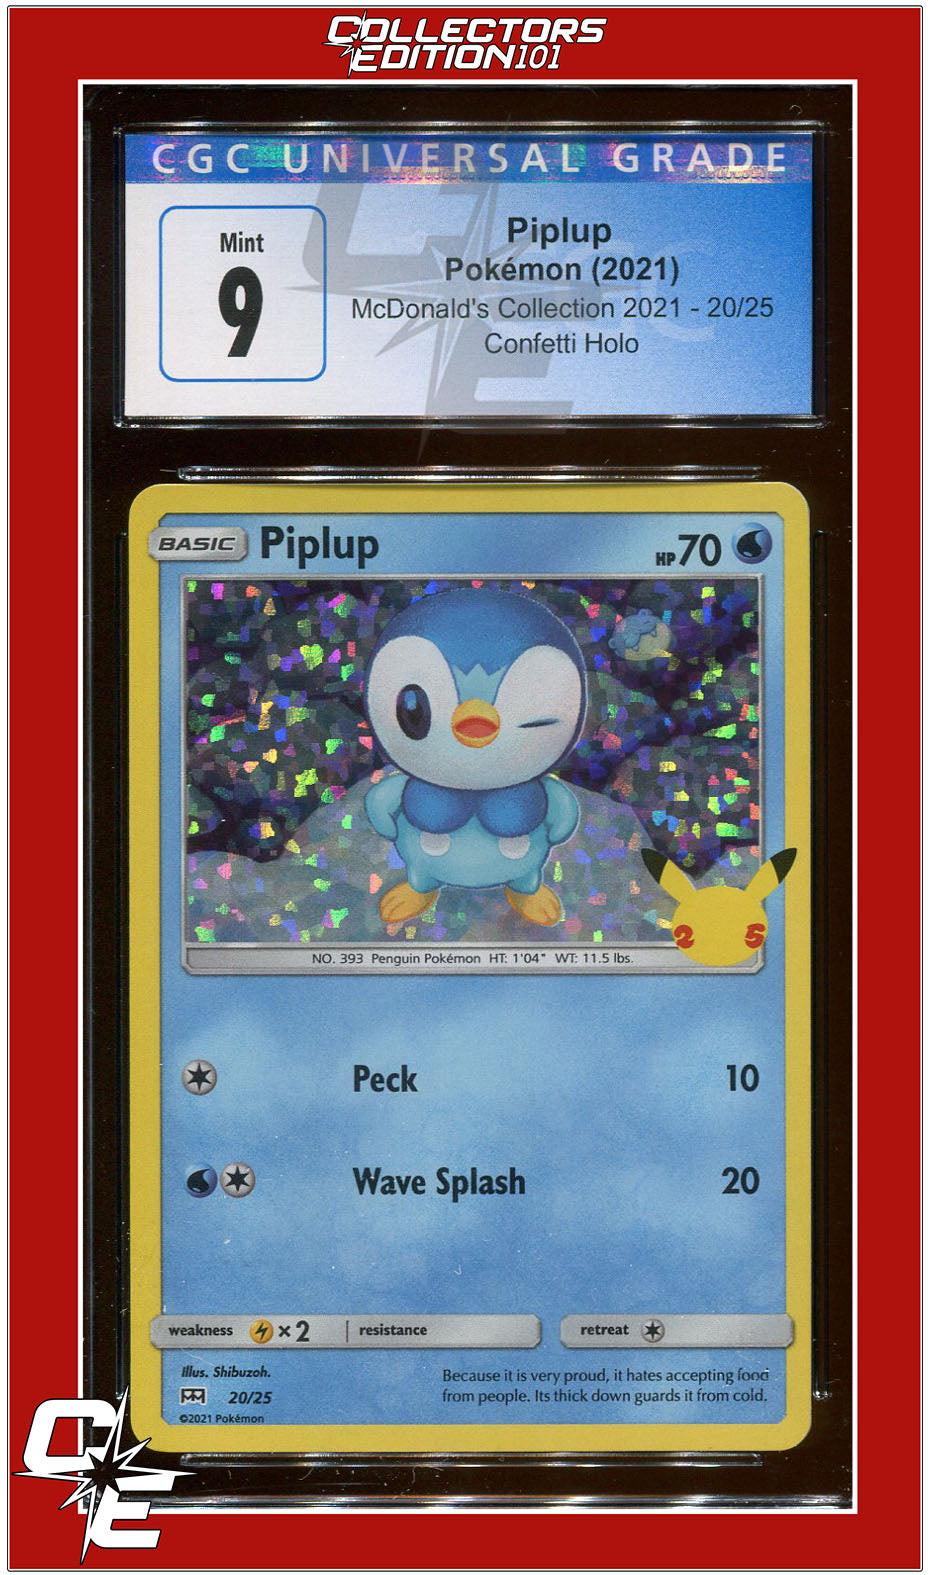 McDonald's Collection 2021 Piplup Confetti Holo 20/25 CGC 9